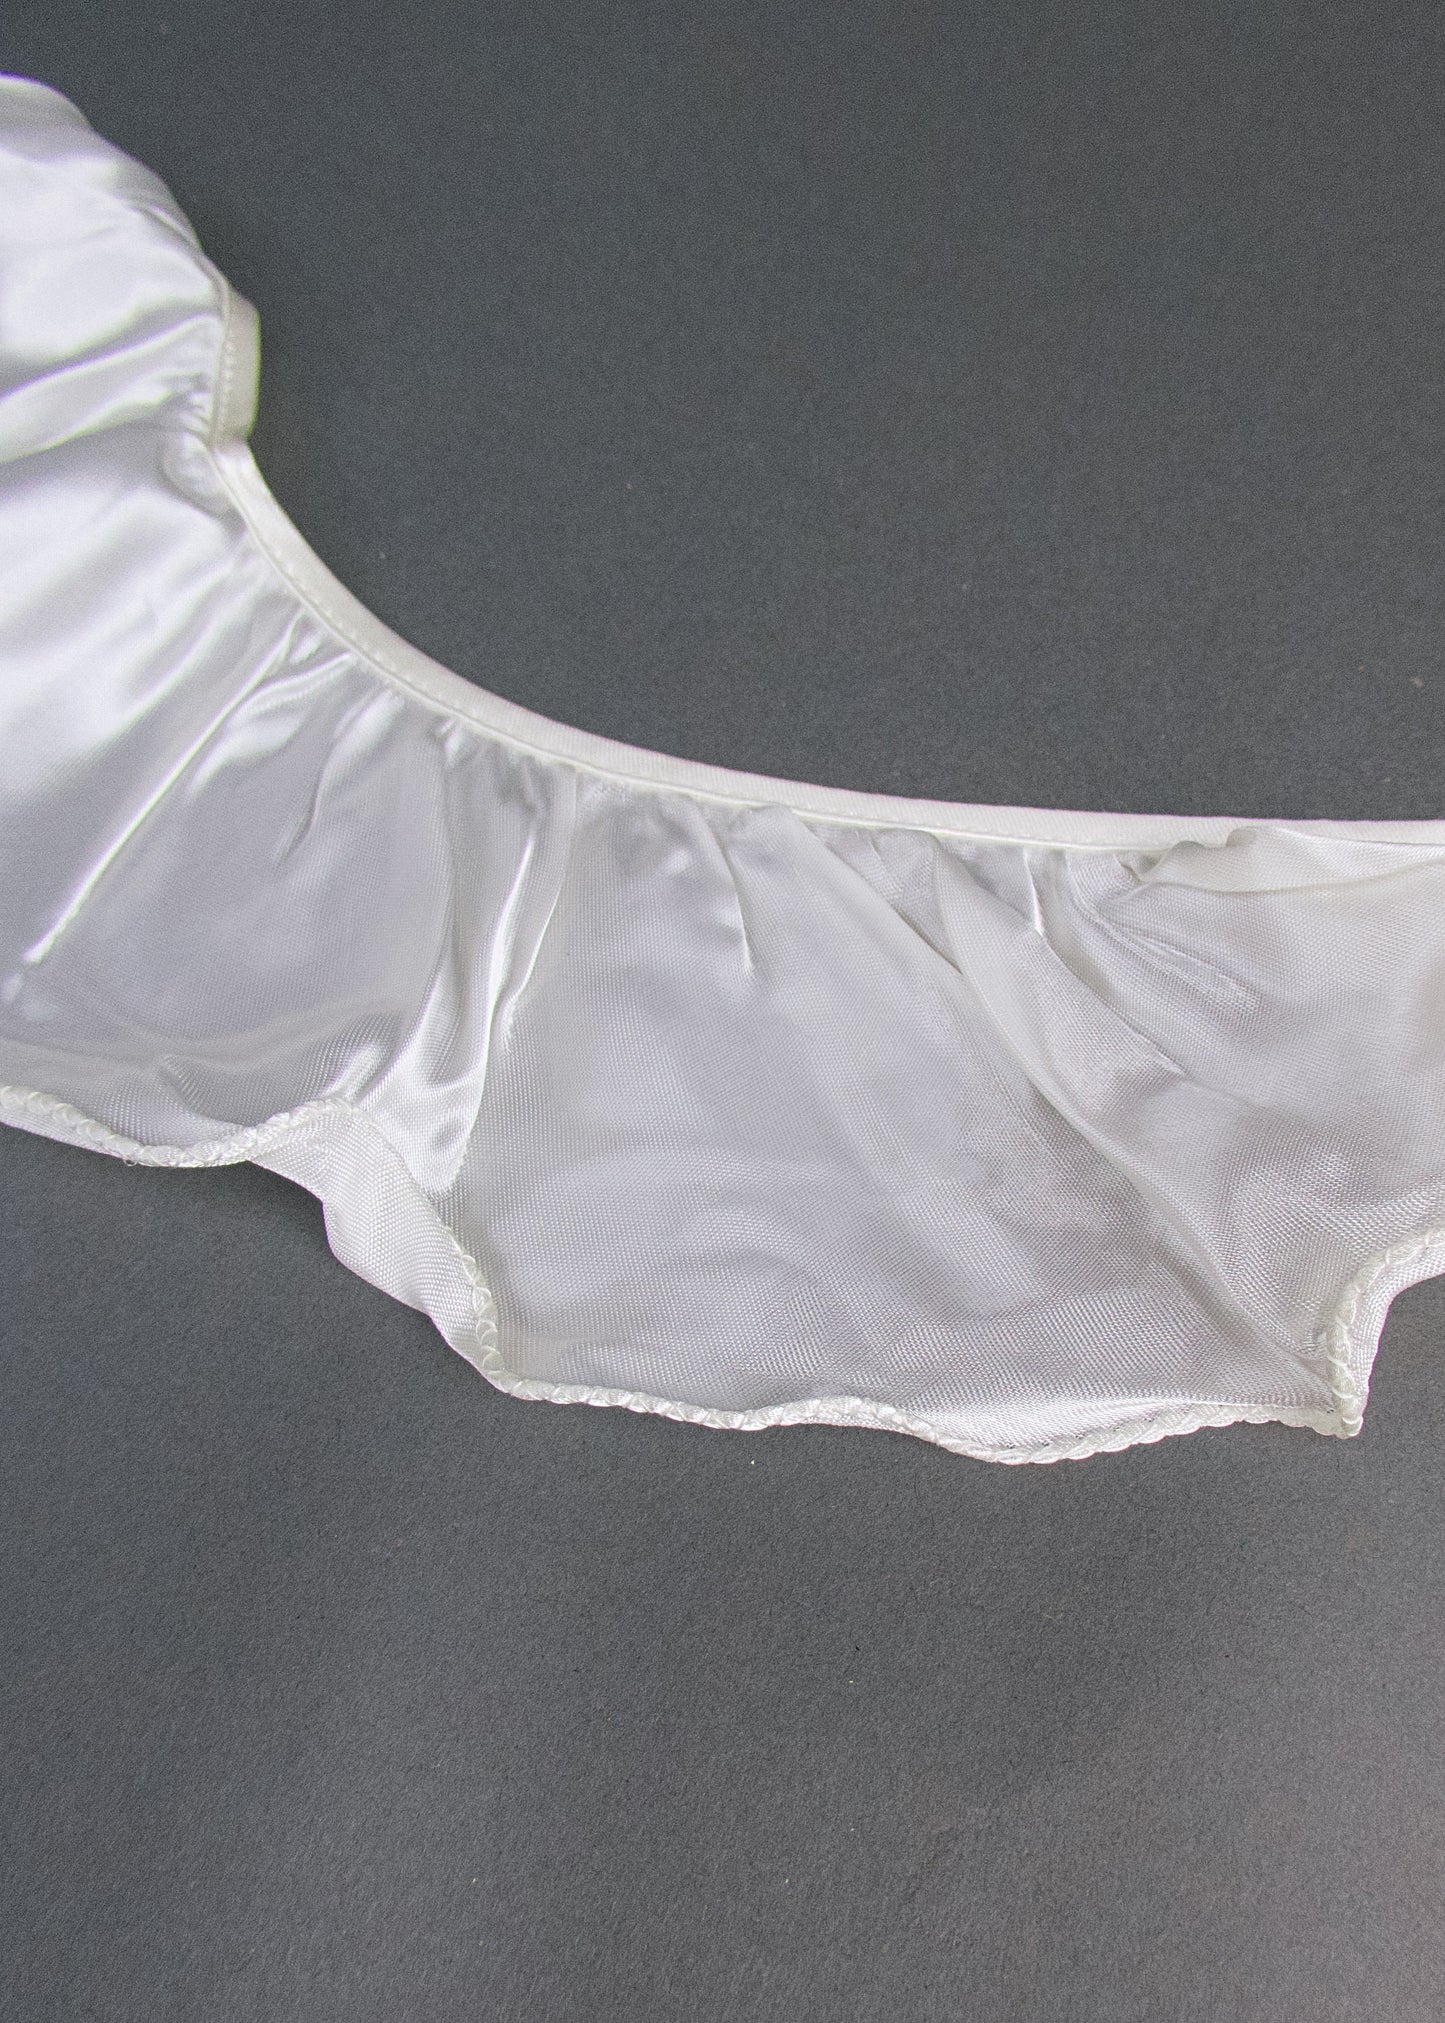 4 Inch Bridal White Ruffle Satin Trim, Sold by the yard